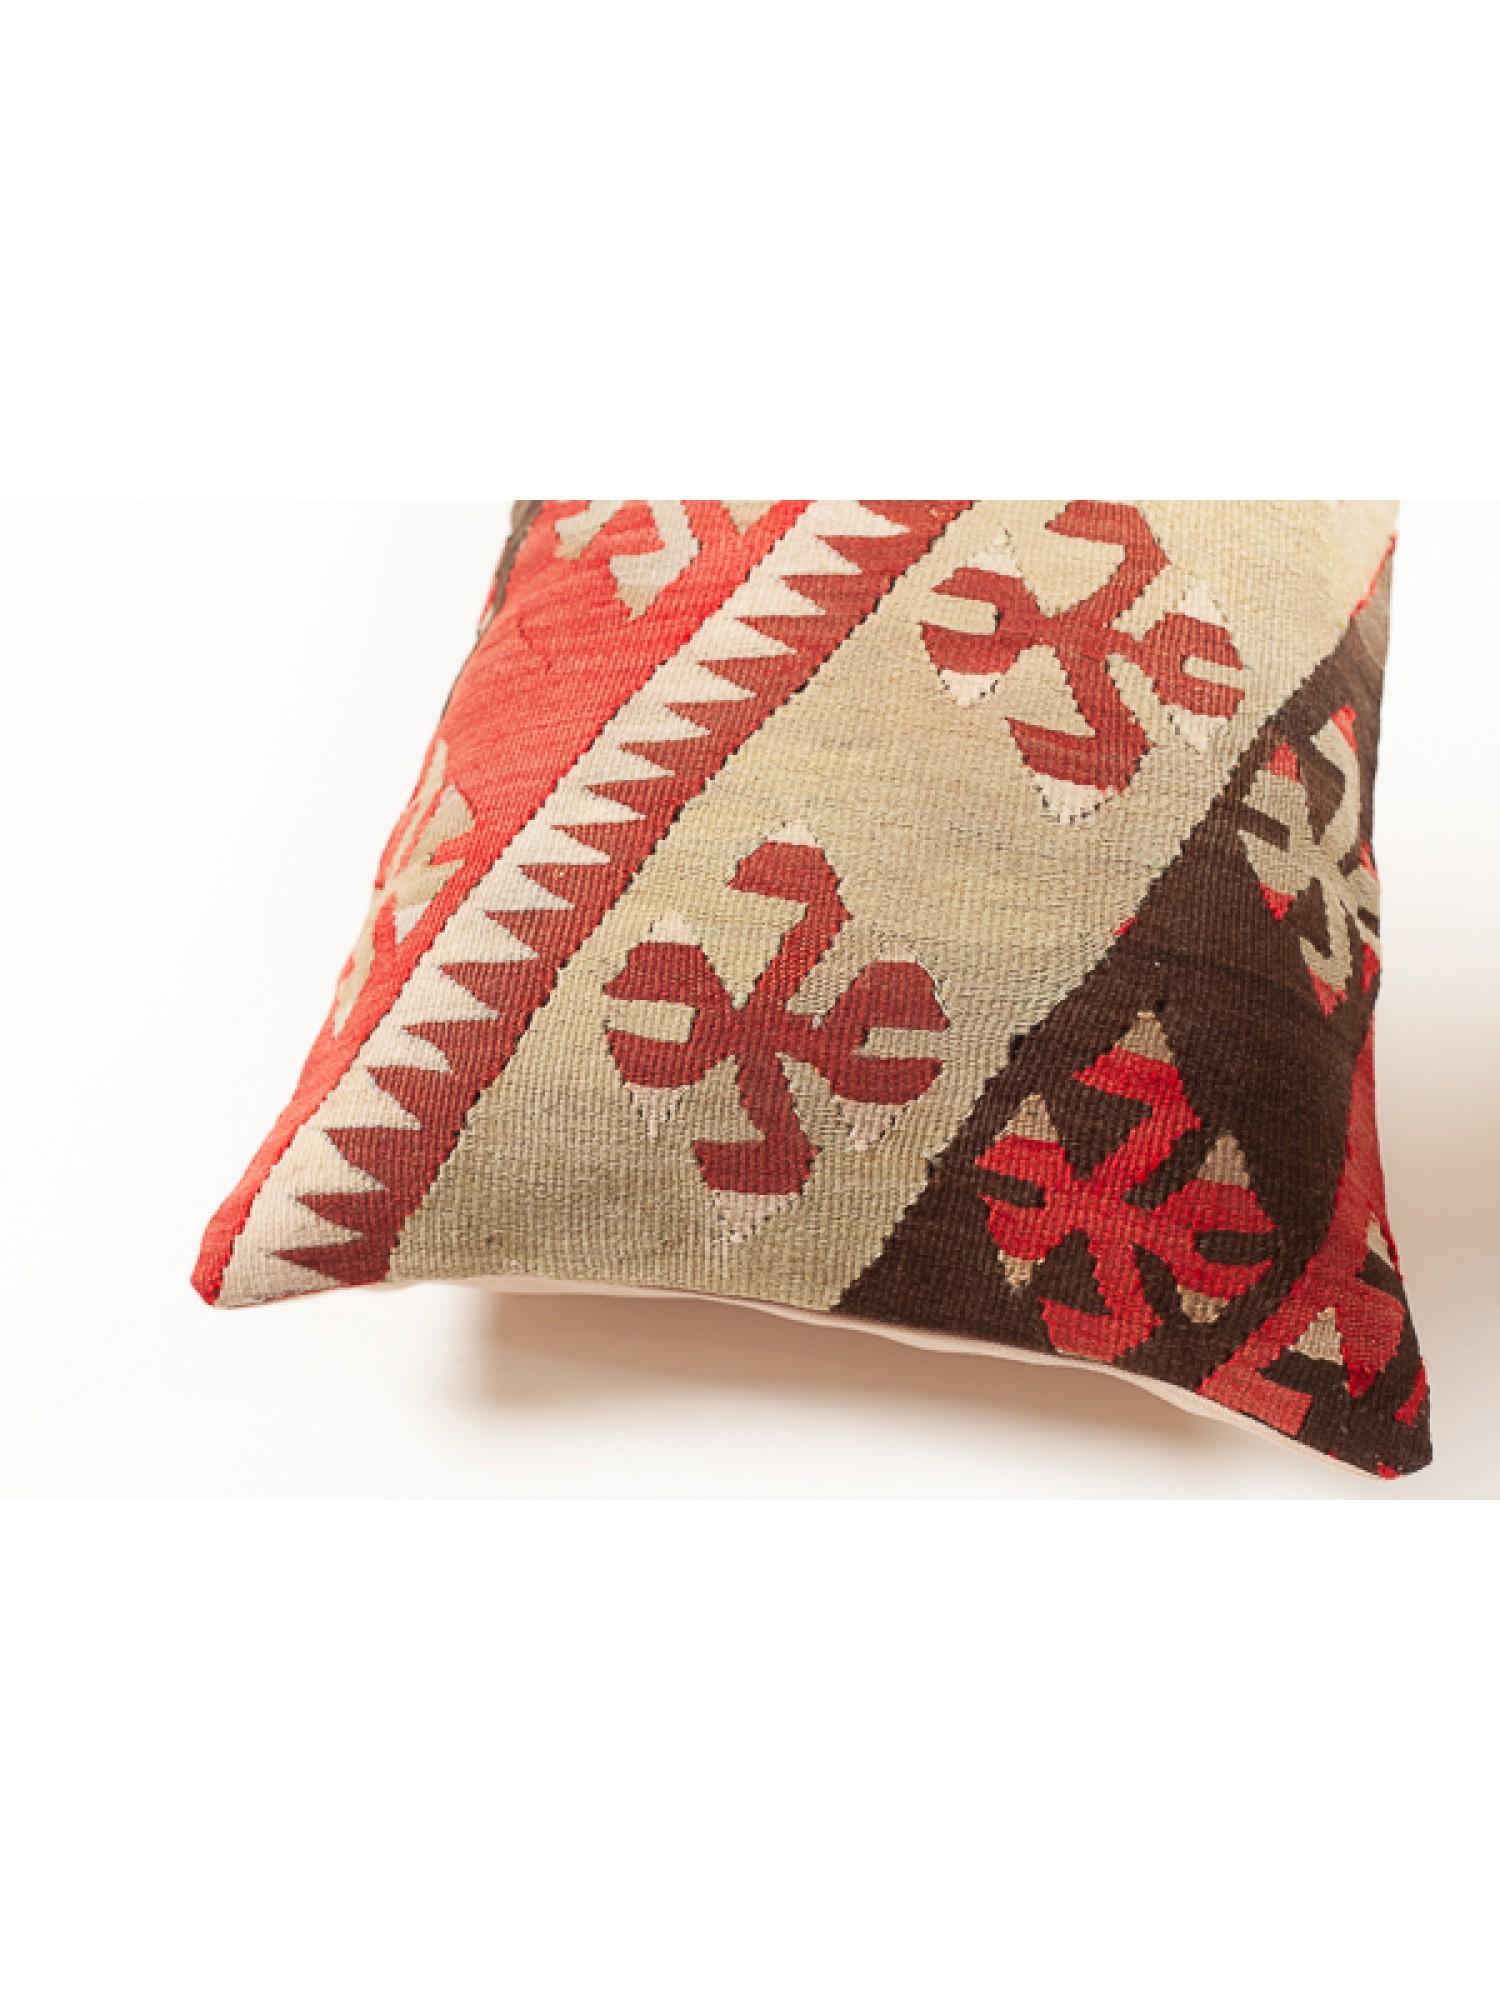 Antique & Old Kilim Cushion Cover, Turkish Yastik Modern Pillow KC3541 In Good Condition For Sale In Tokyo, JP